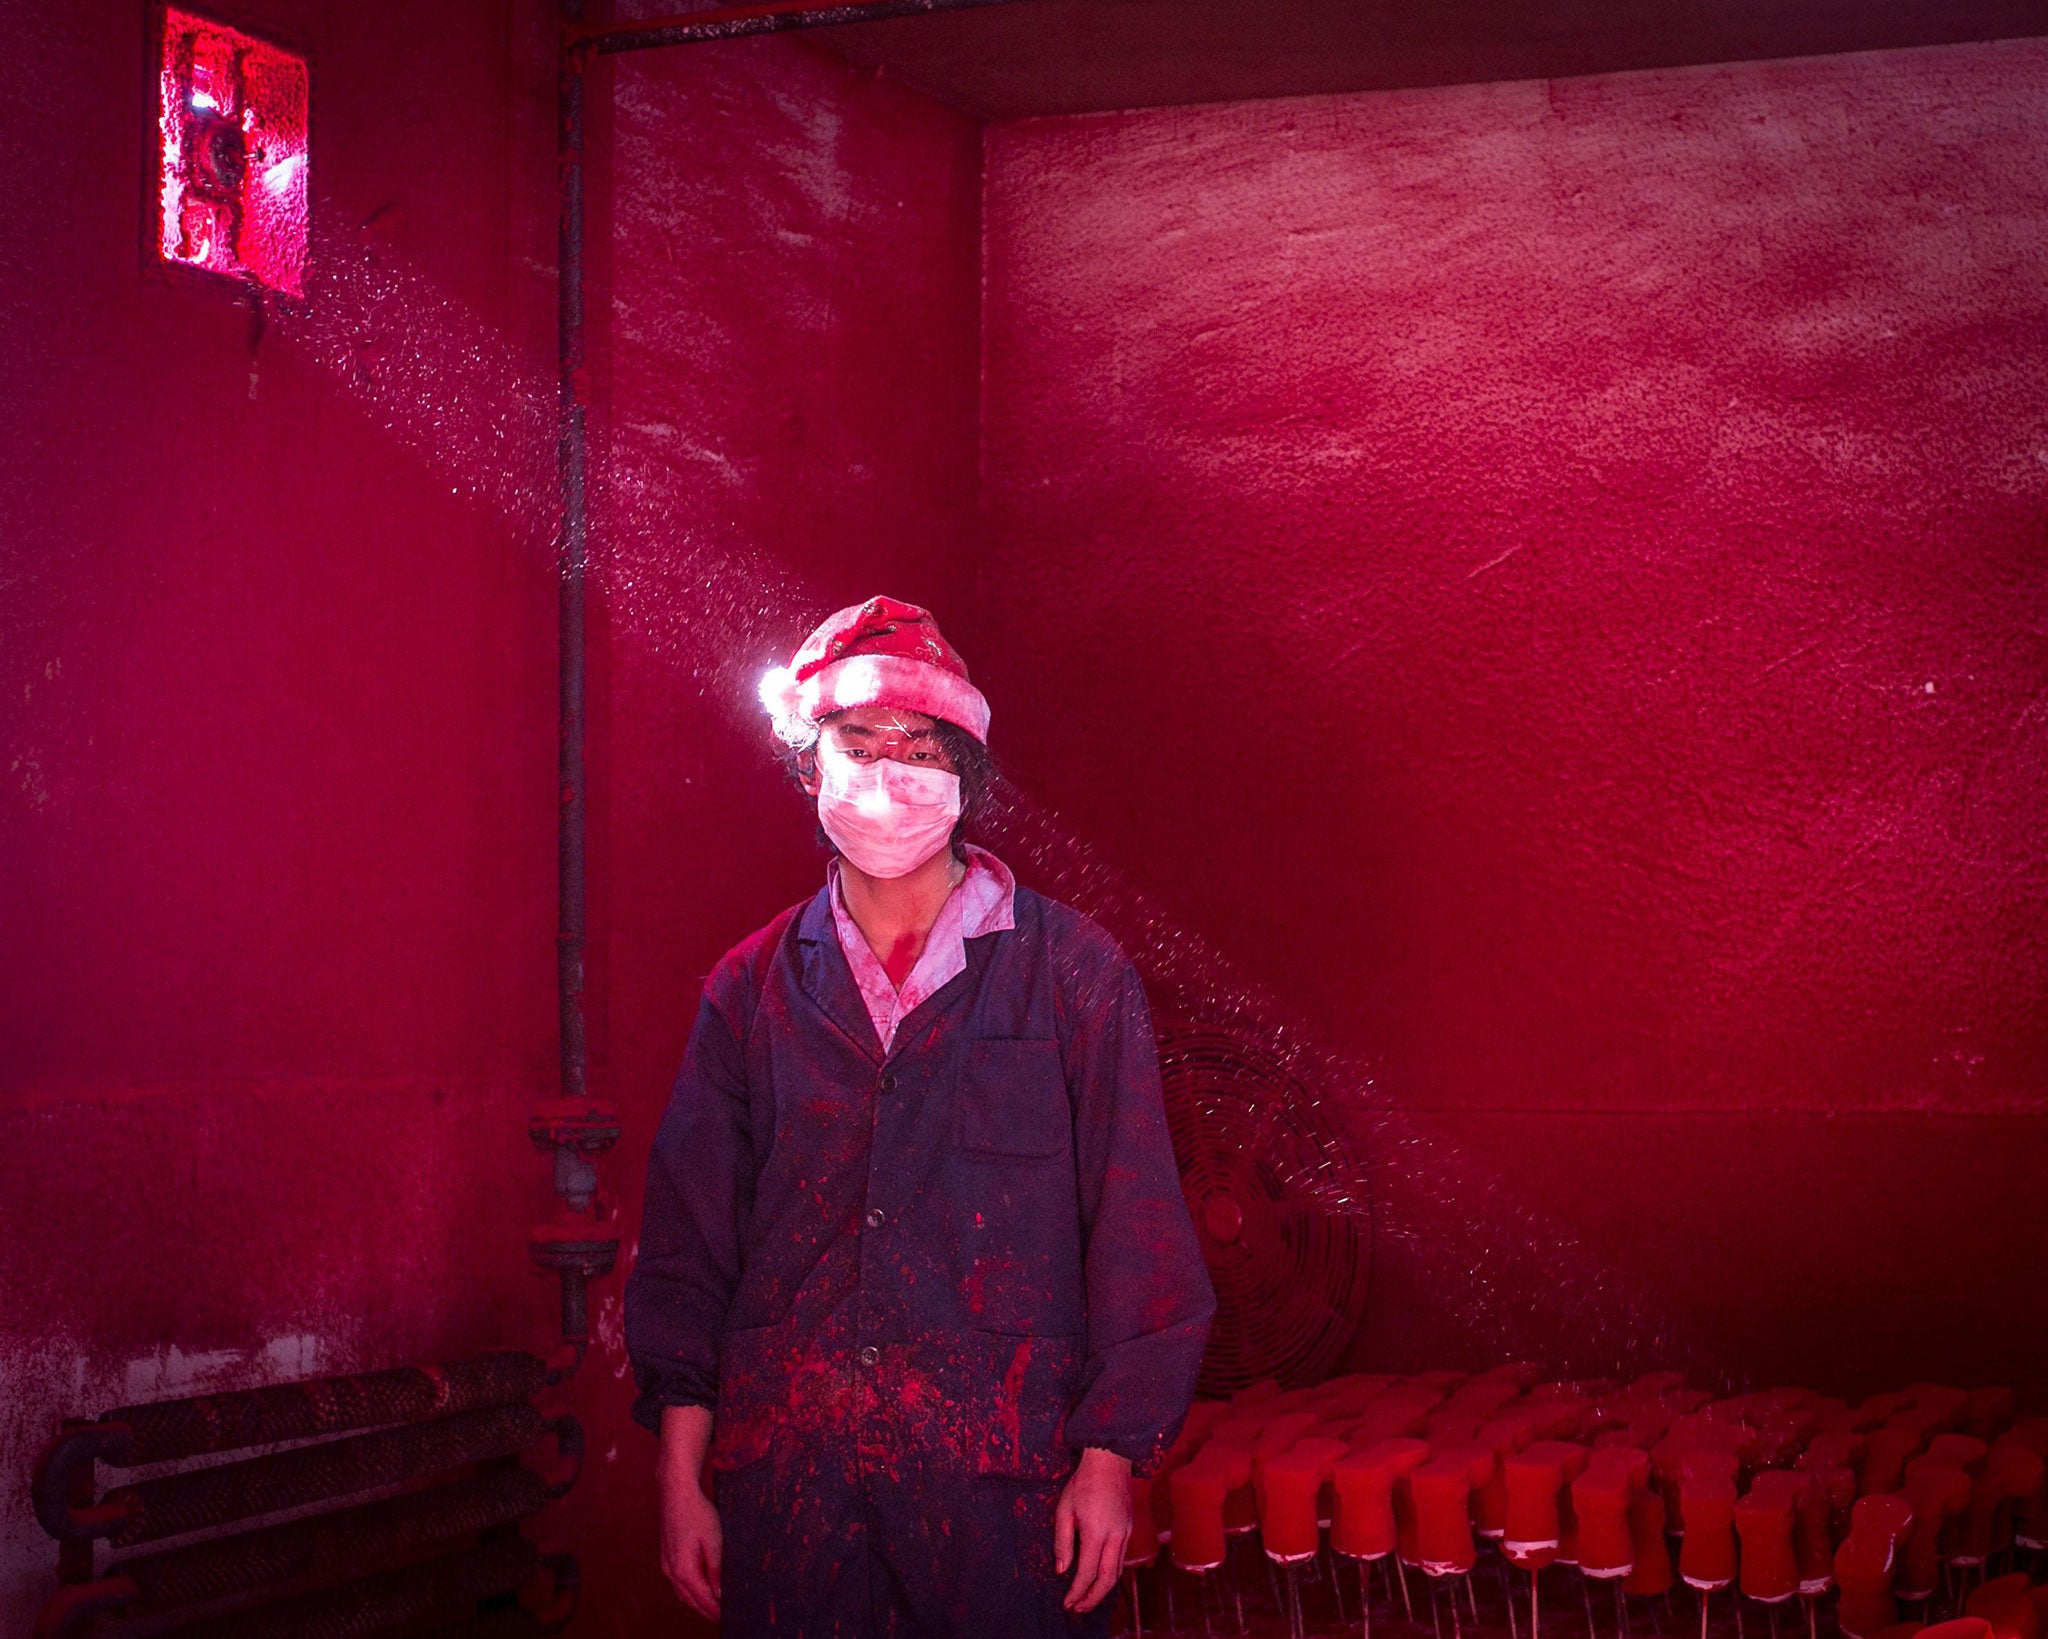 Contemporary Issues runner-up: A worker at a Christmas decoration factory, in China